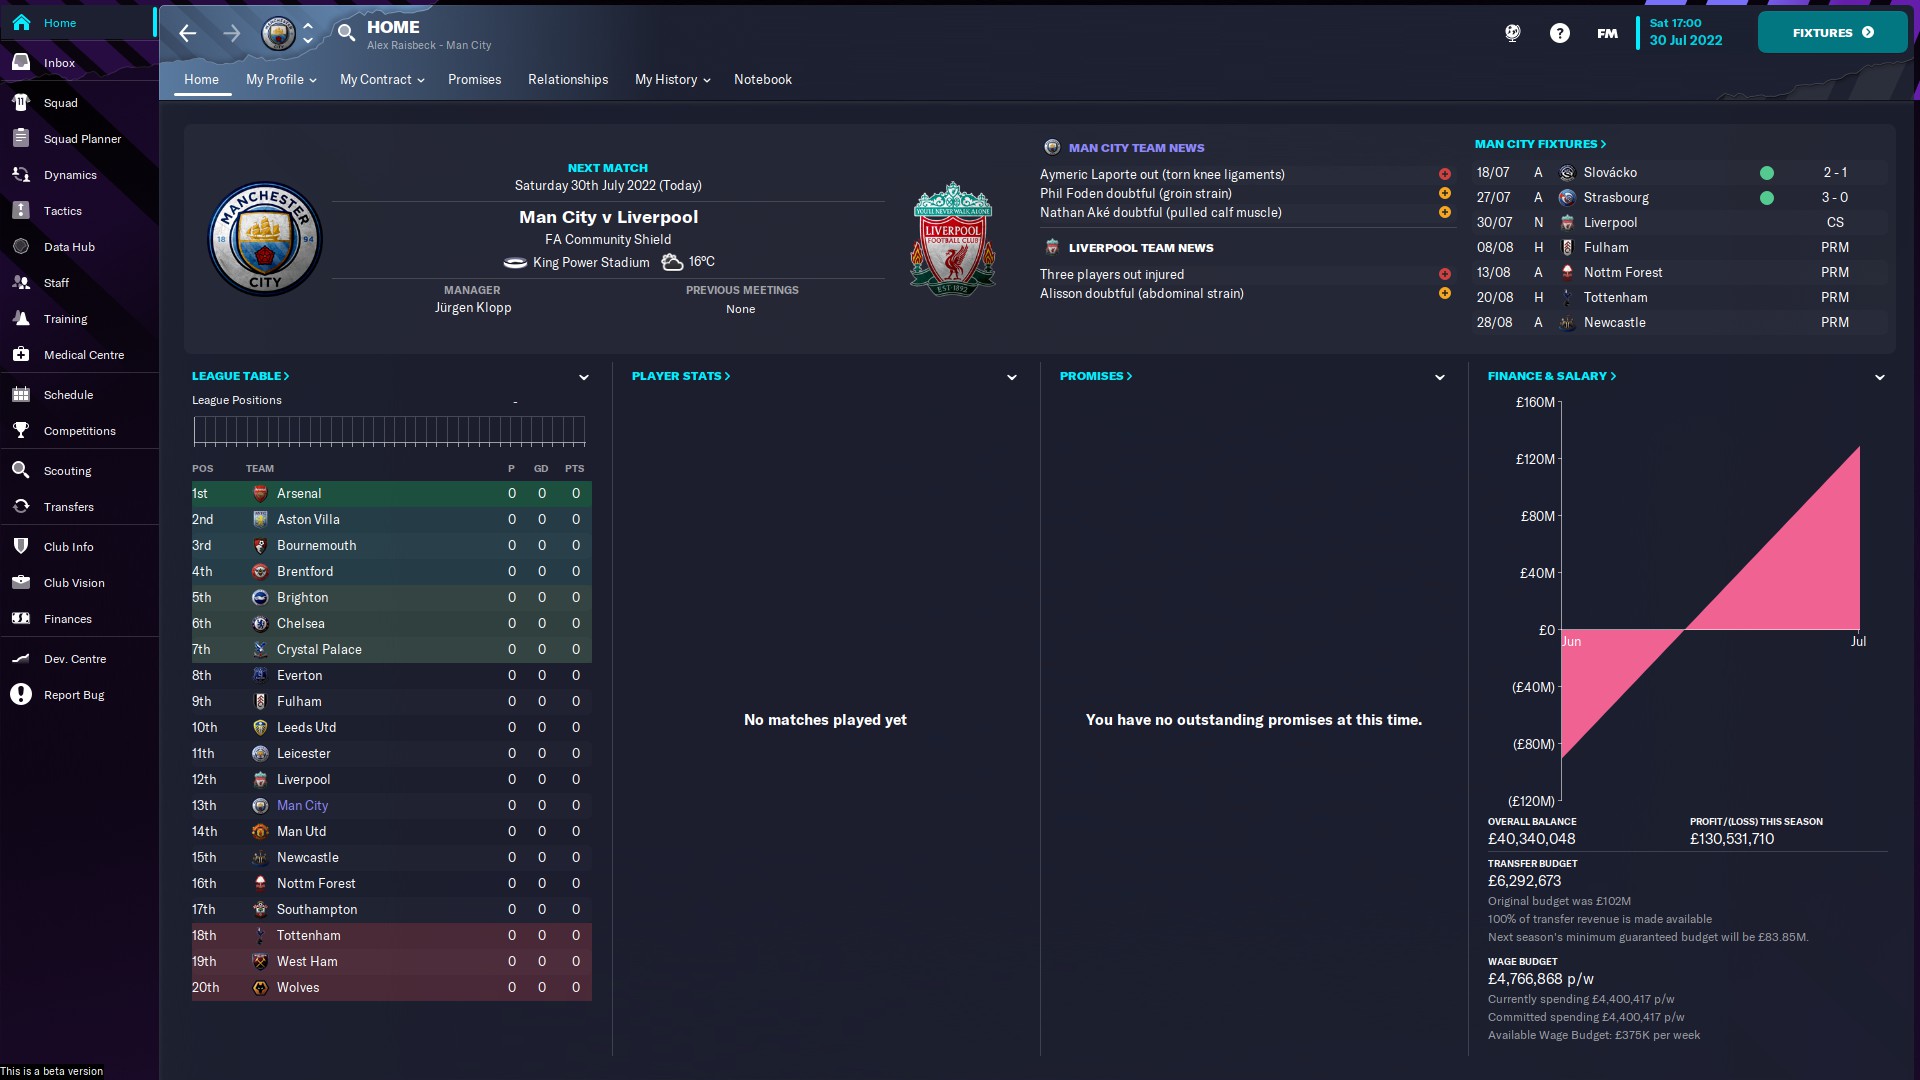 Football Manager 2020 badges: How to install and download the best